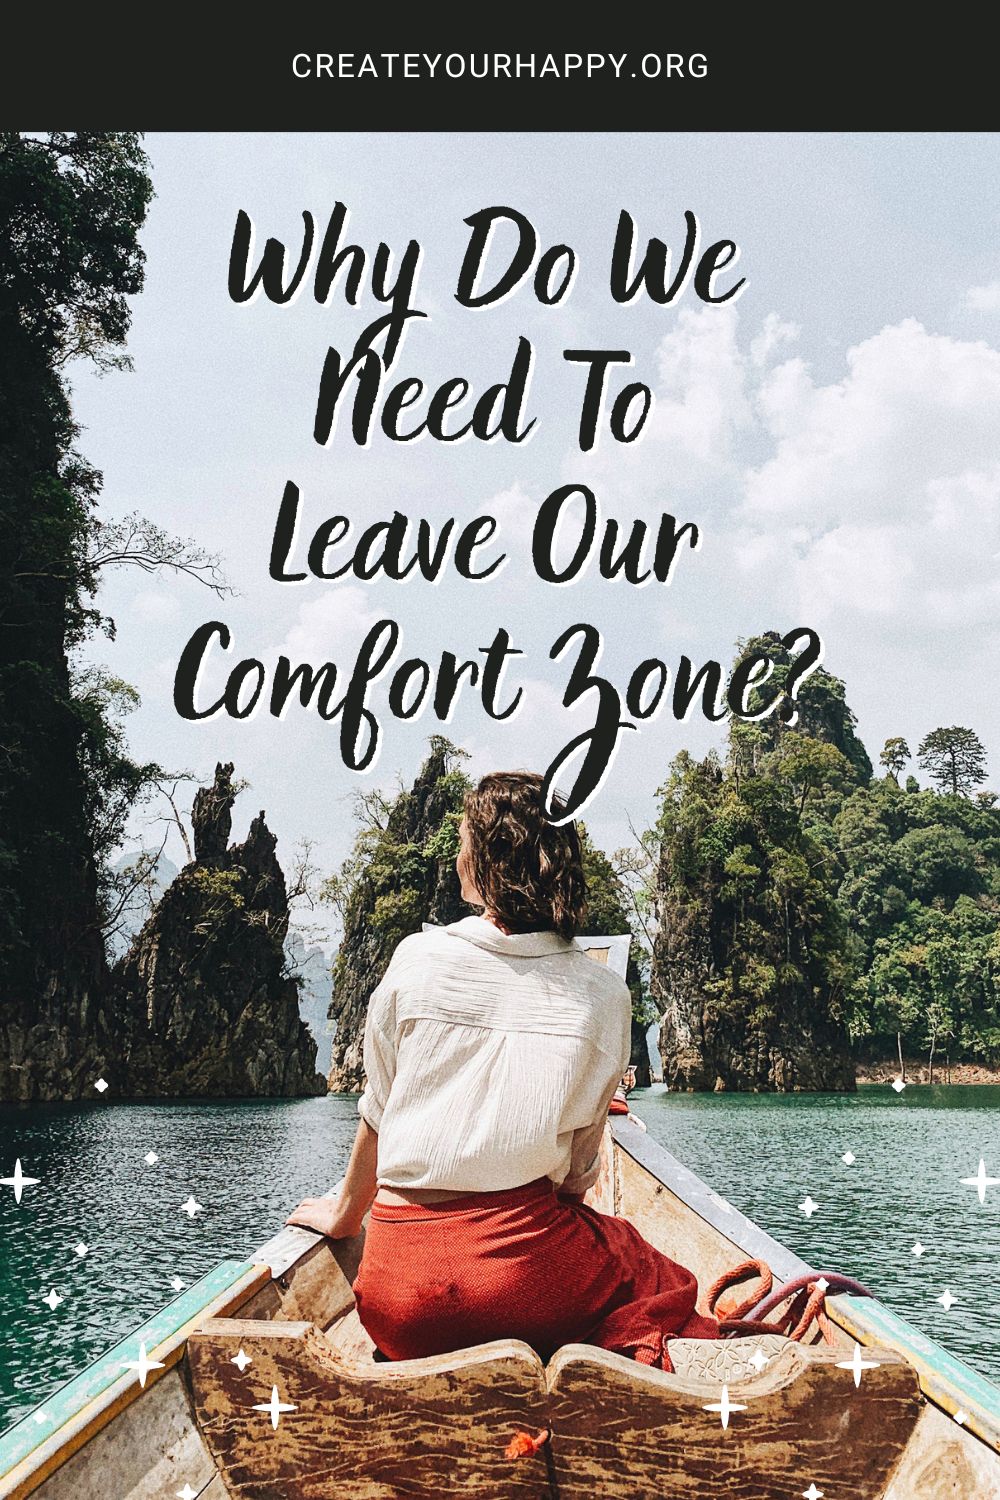 Why Do We Need to Leave Our Comfort Zone?